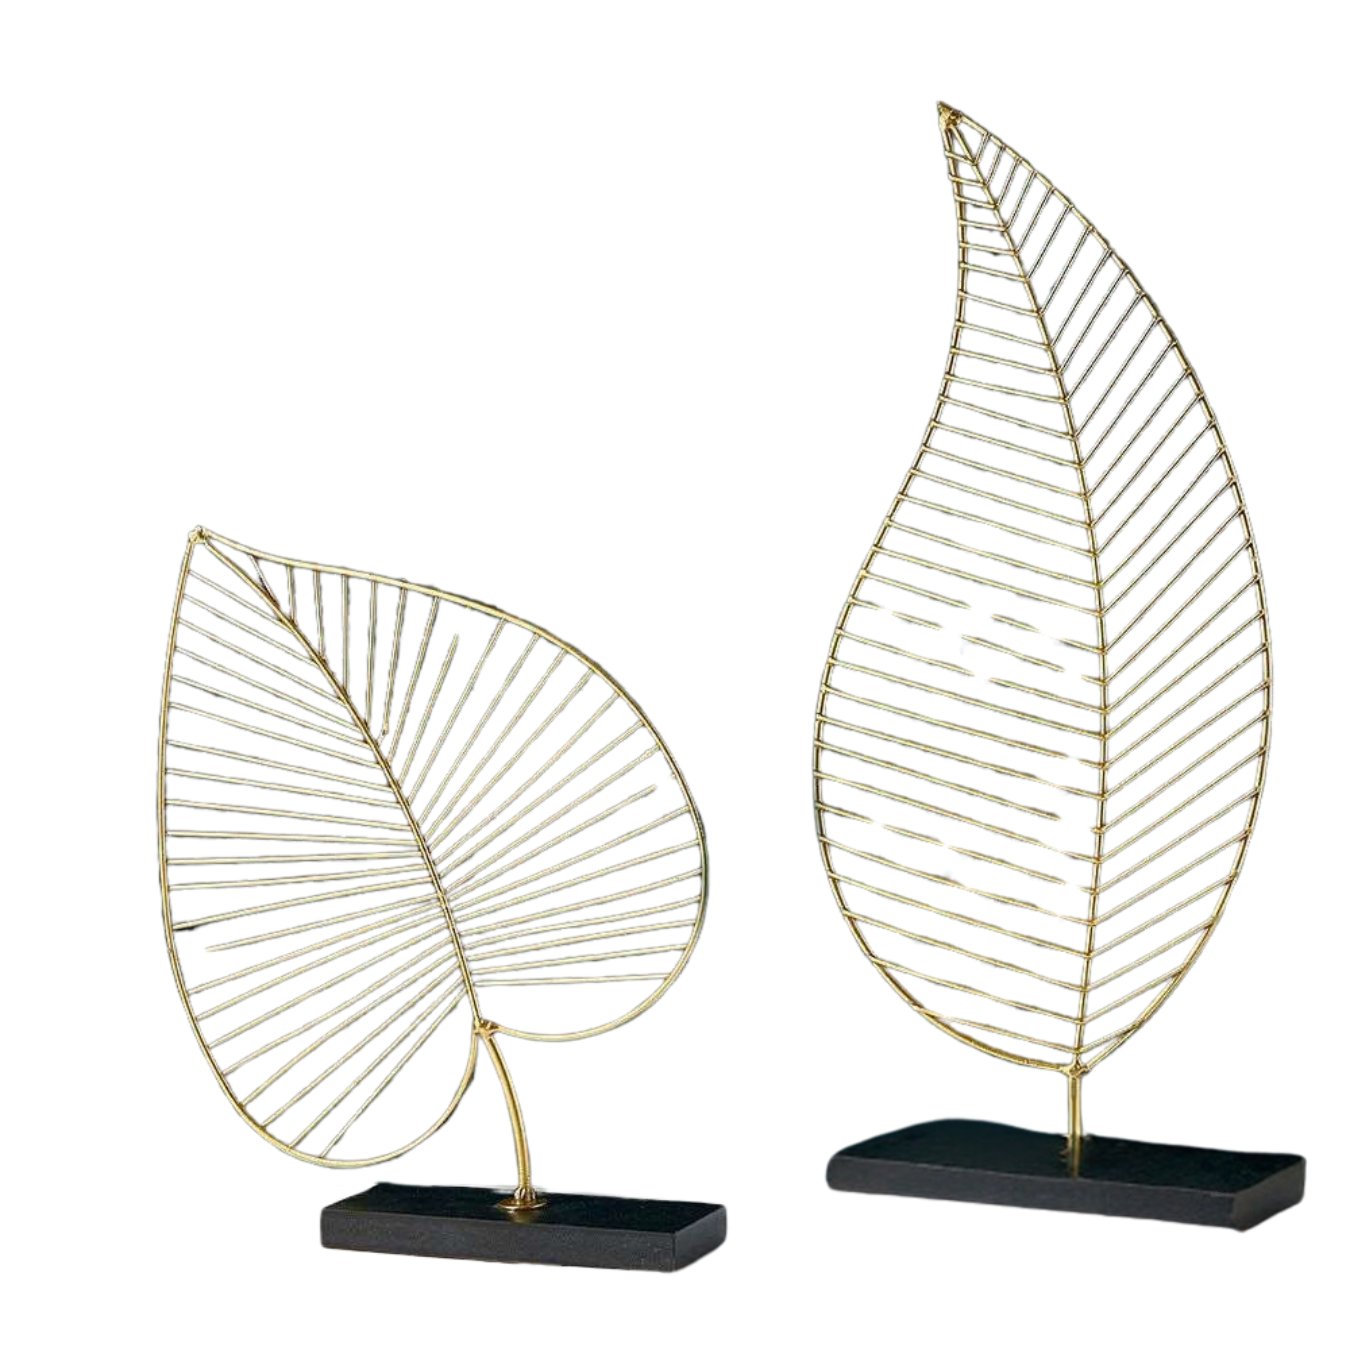 Stainless Steel Leaf Art Pieces - Set of 2 with Elegant Design